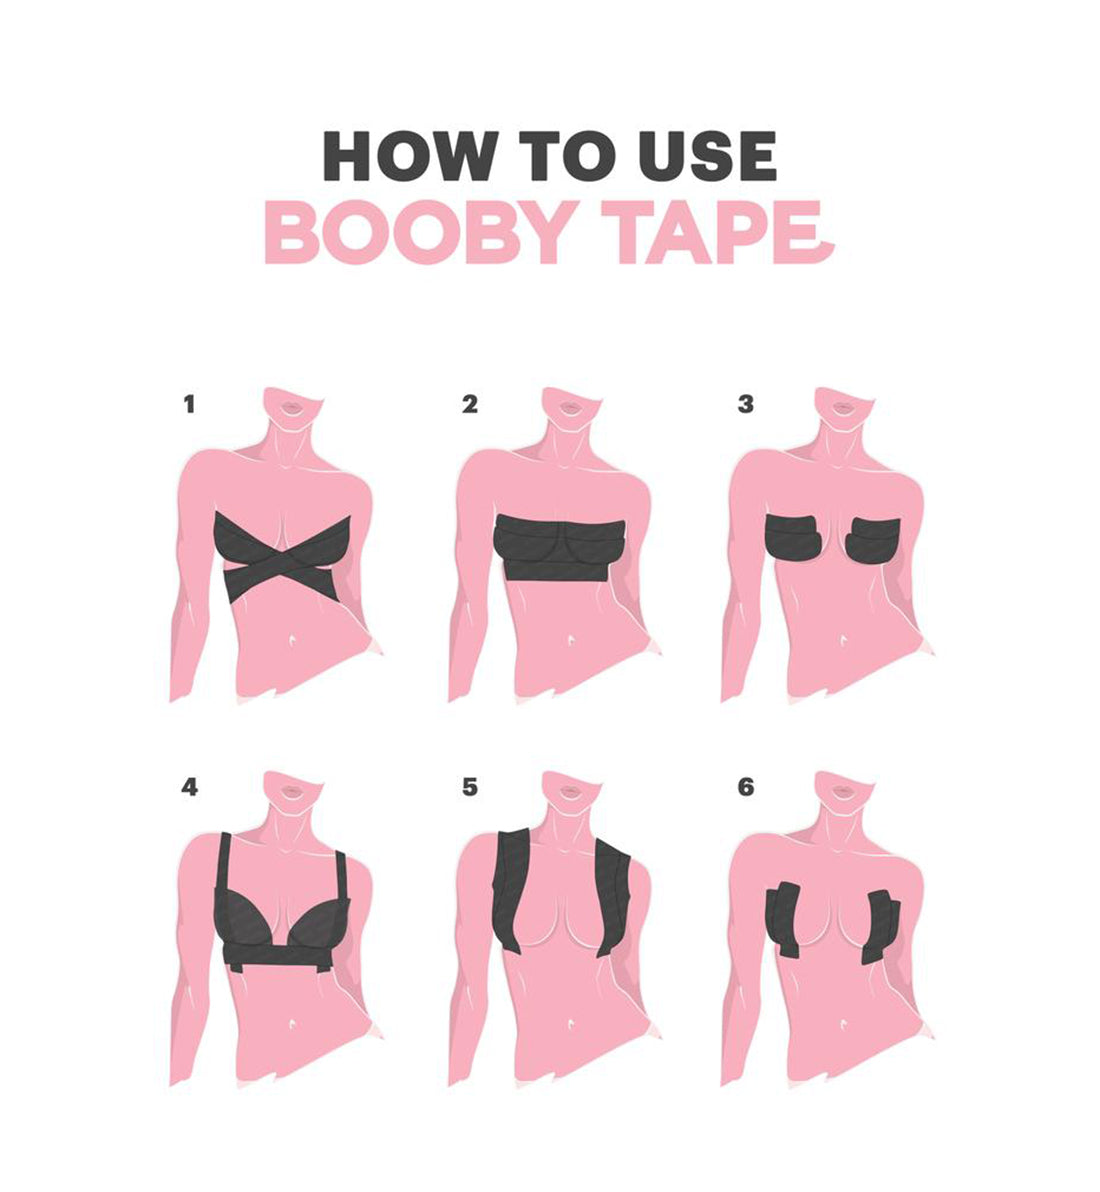 Booby Tape The Original Breast Tape,5 m,Nude - Nude,One Size